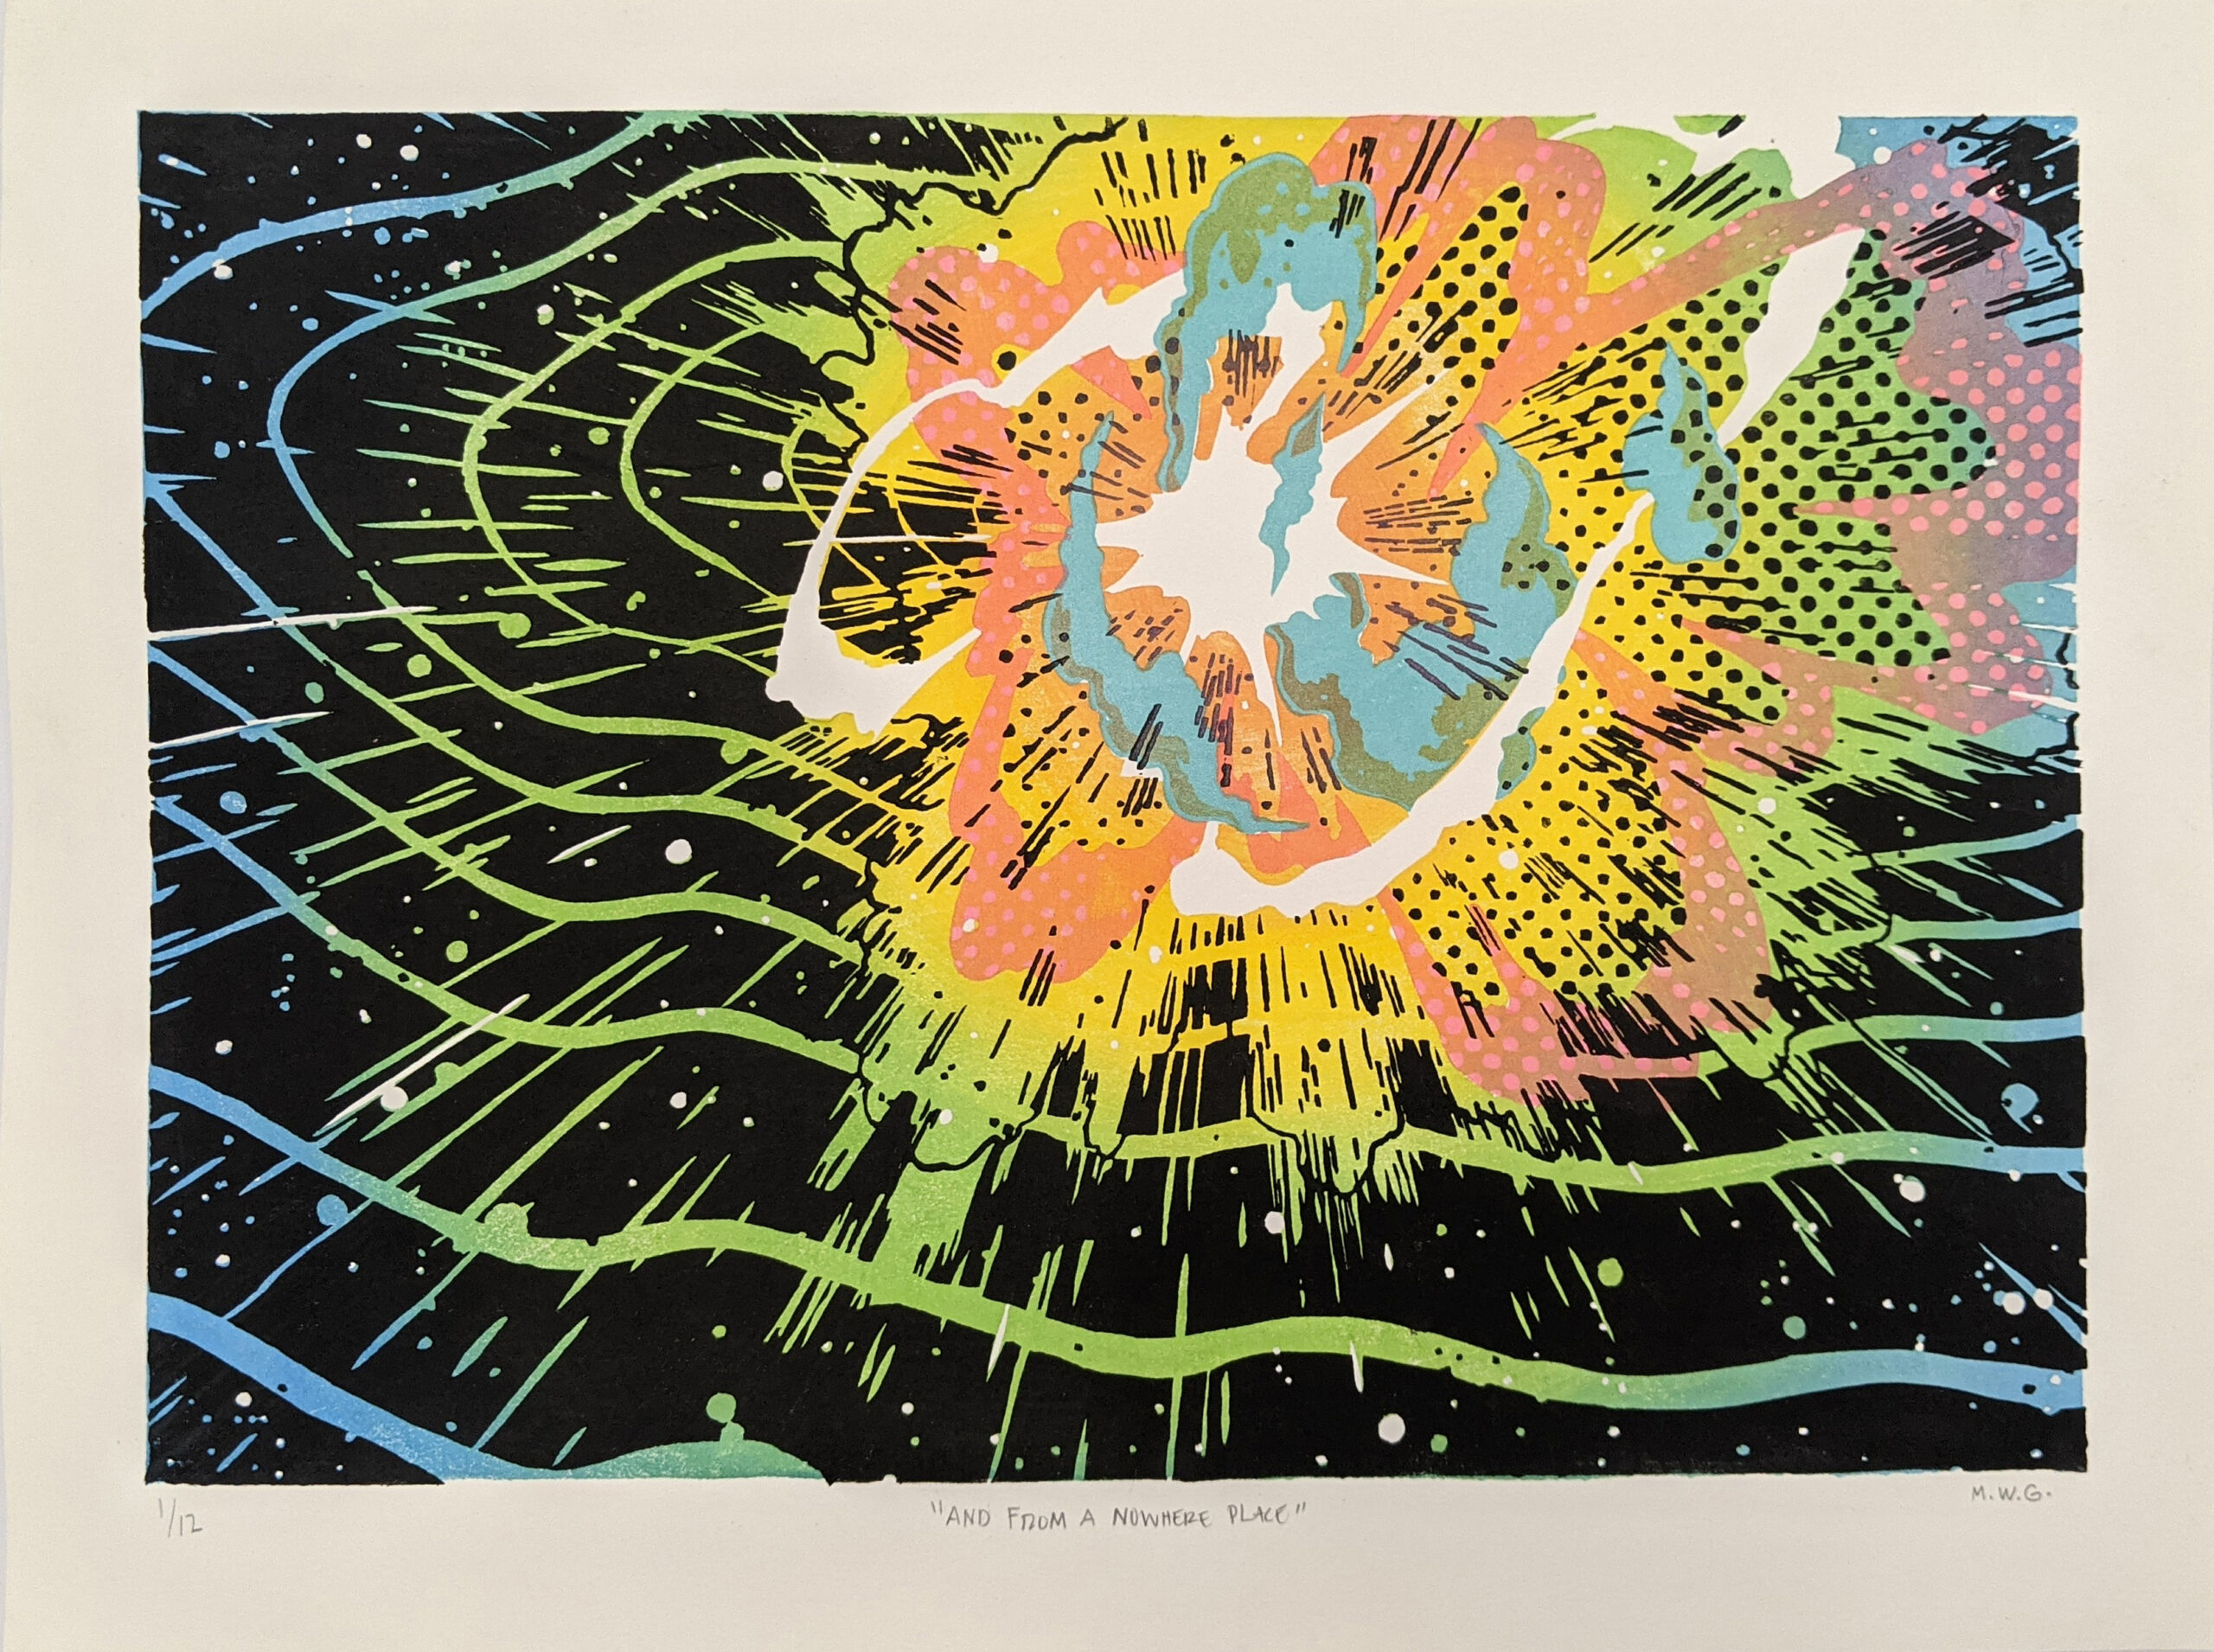 "And From a Nowhere Space" A water-based wood block print of a colorful, graphic cosmic explosion.